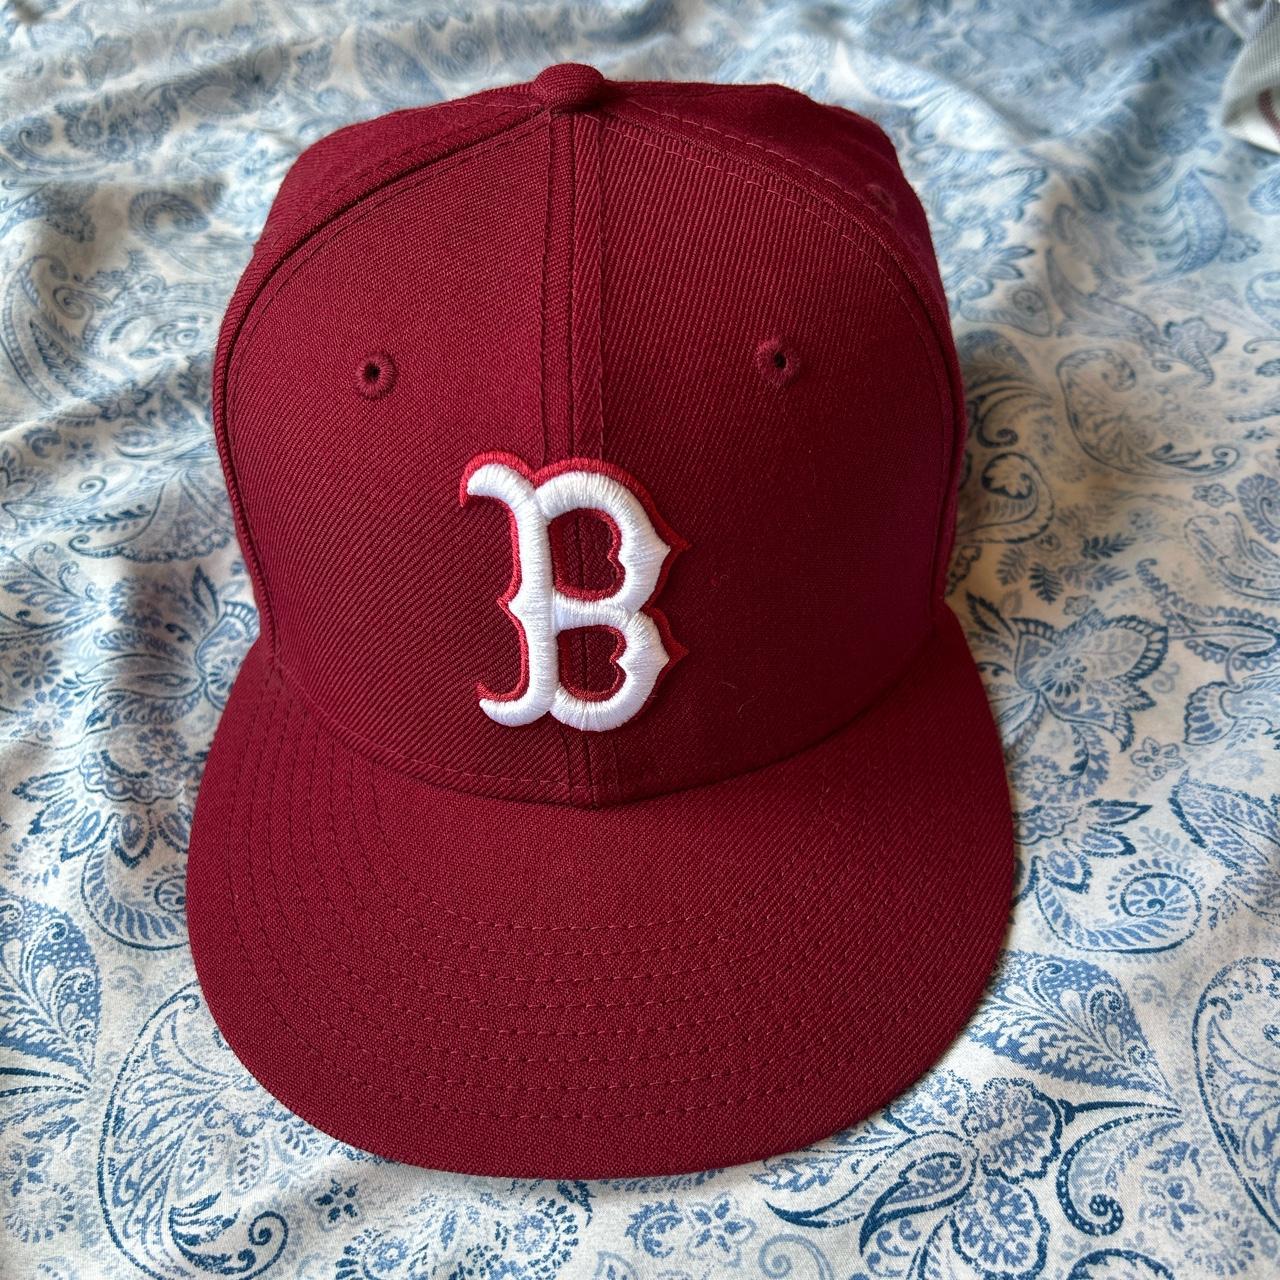 Boston Red Sox maroon/burgundy fitted hat. Size 7